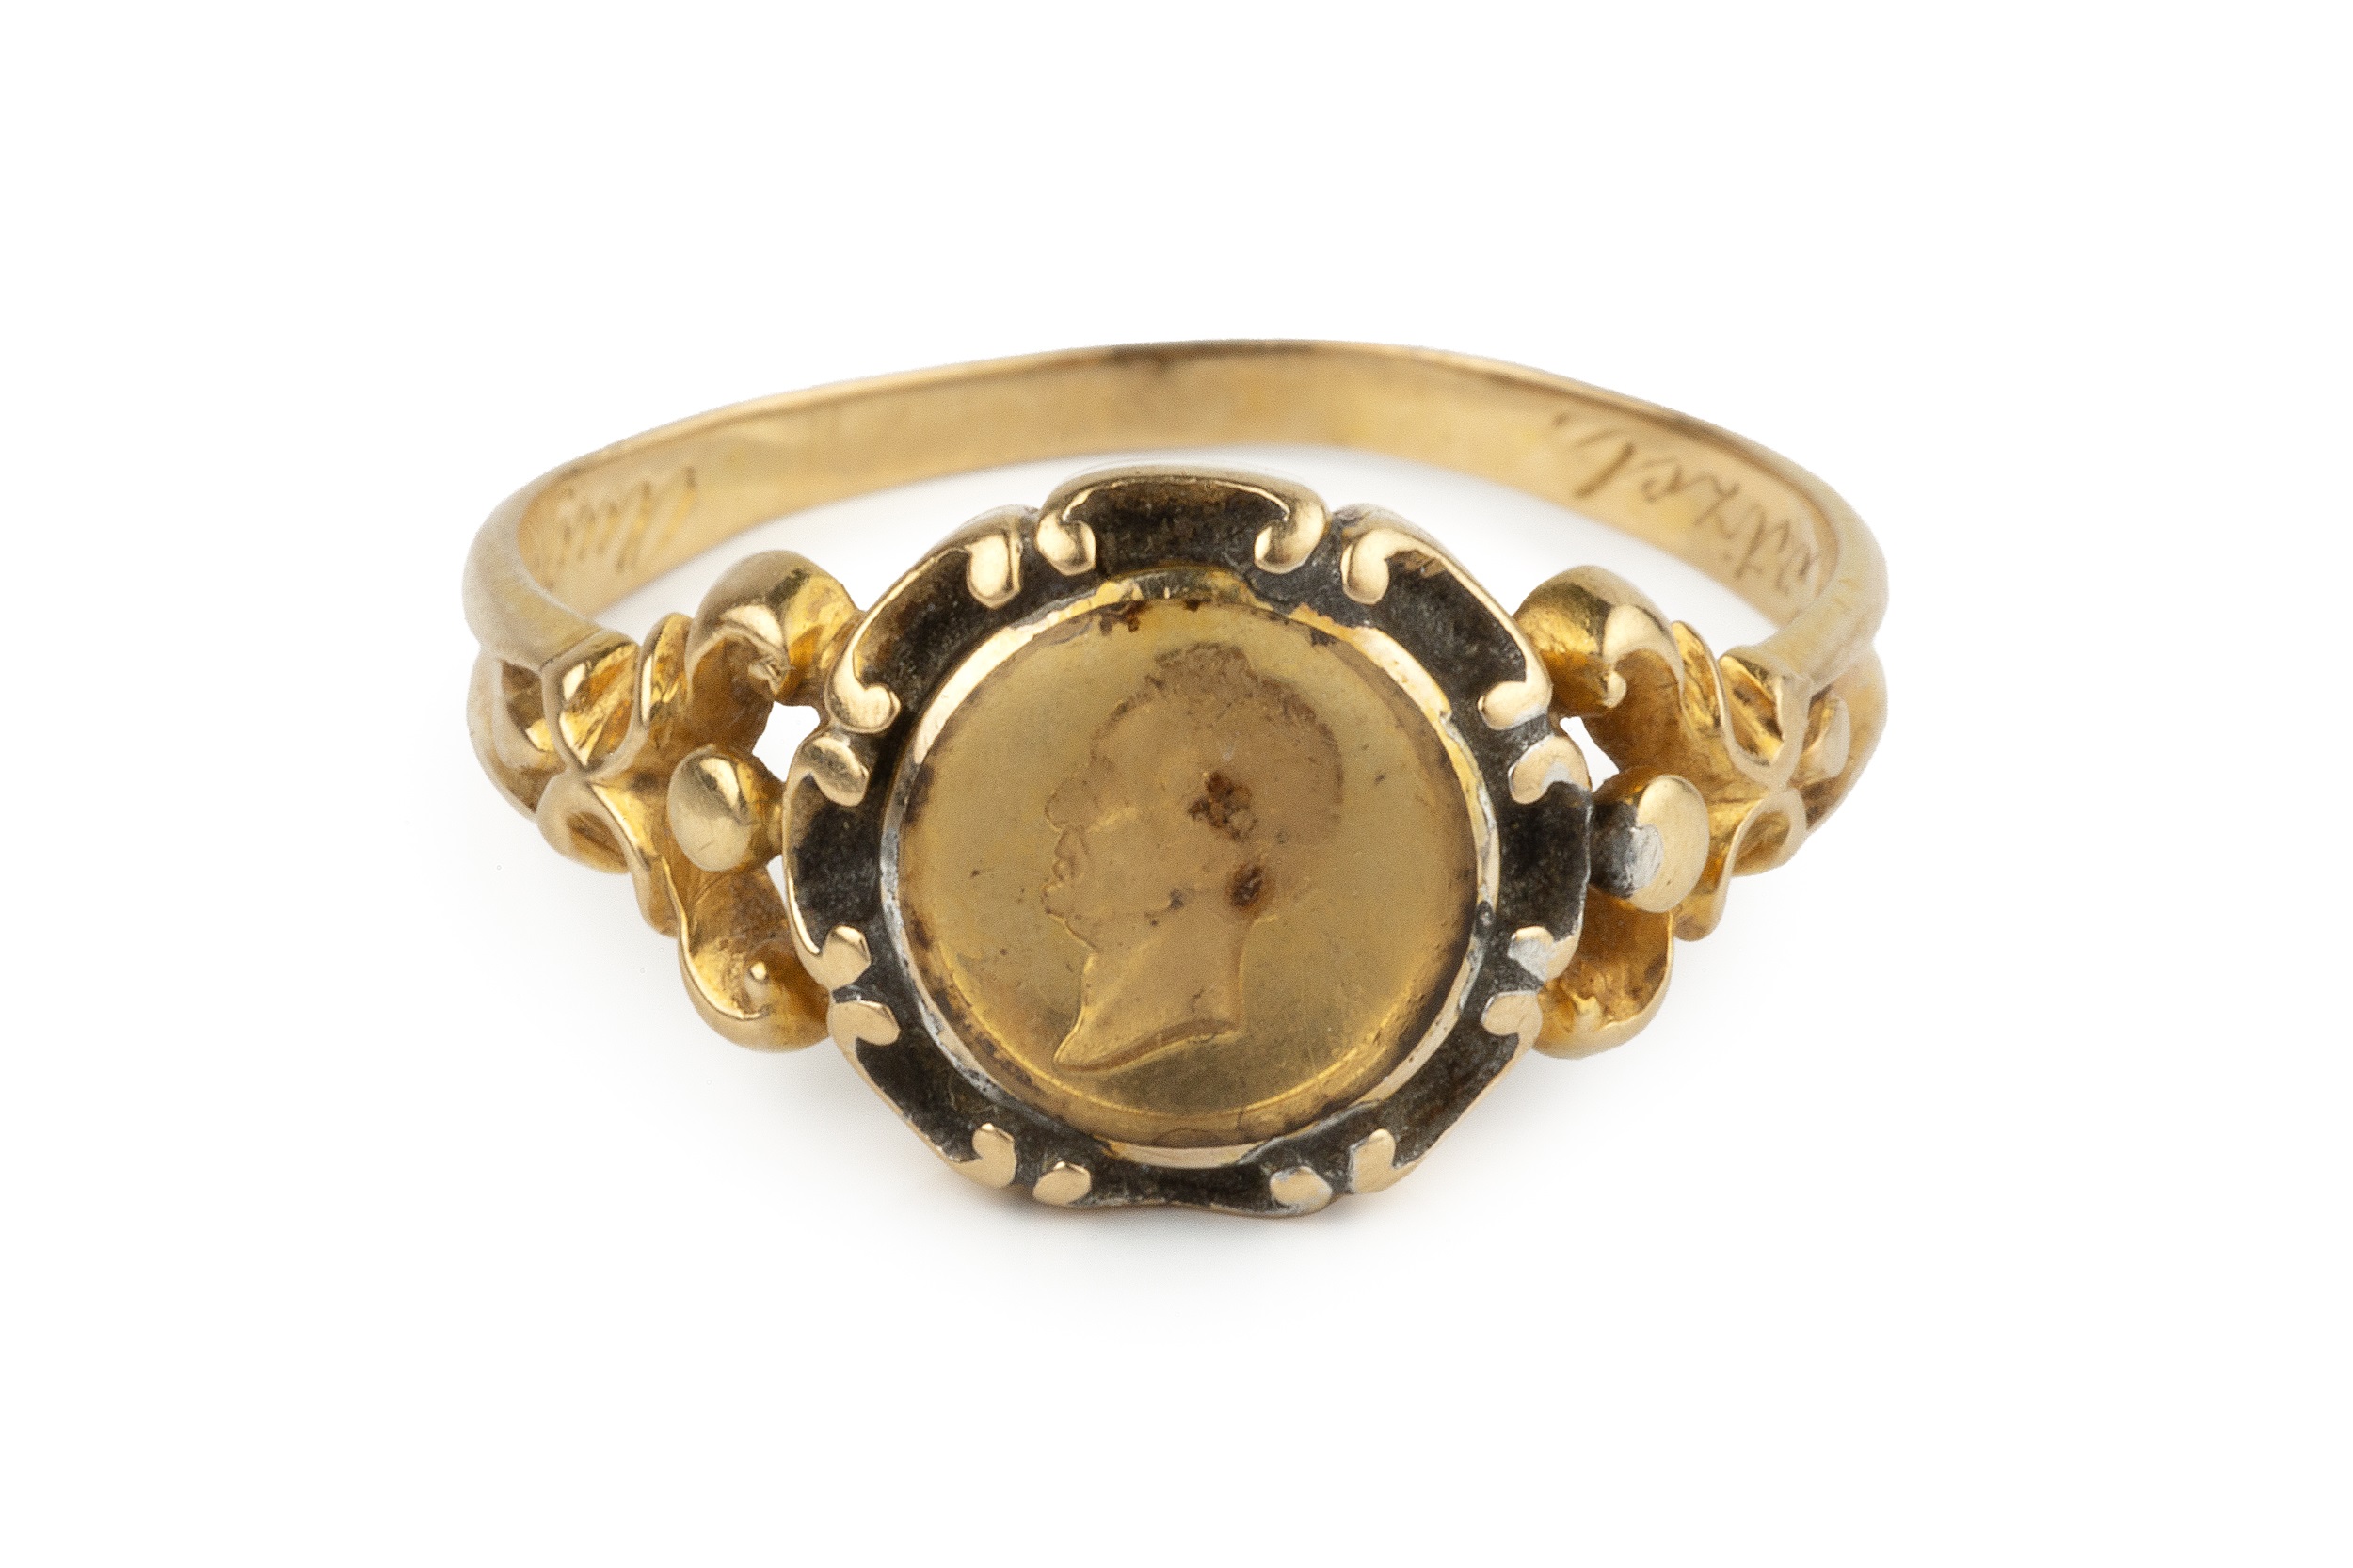 A 19th century gold memorial ring, having glazed relief portrait, possibly depicting the Duke of